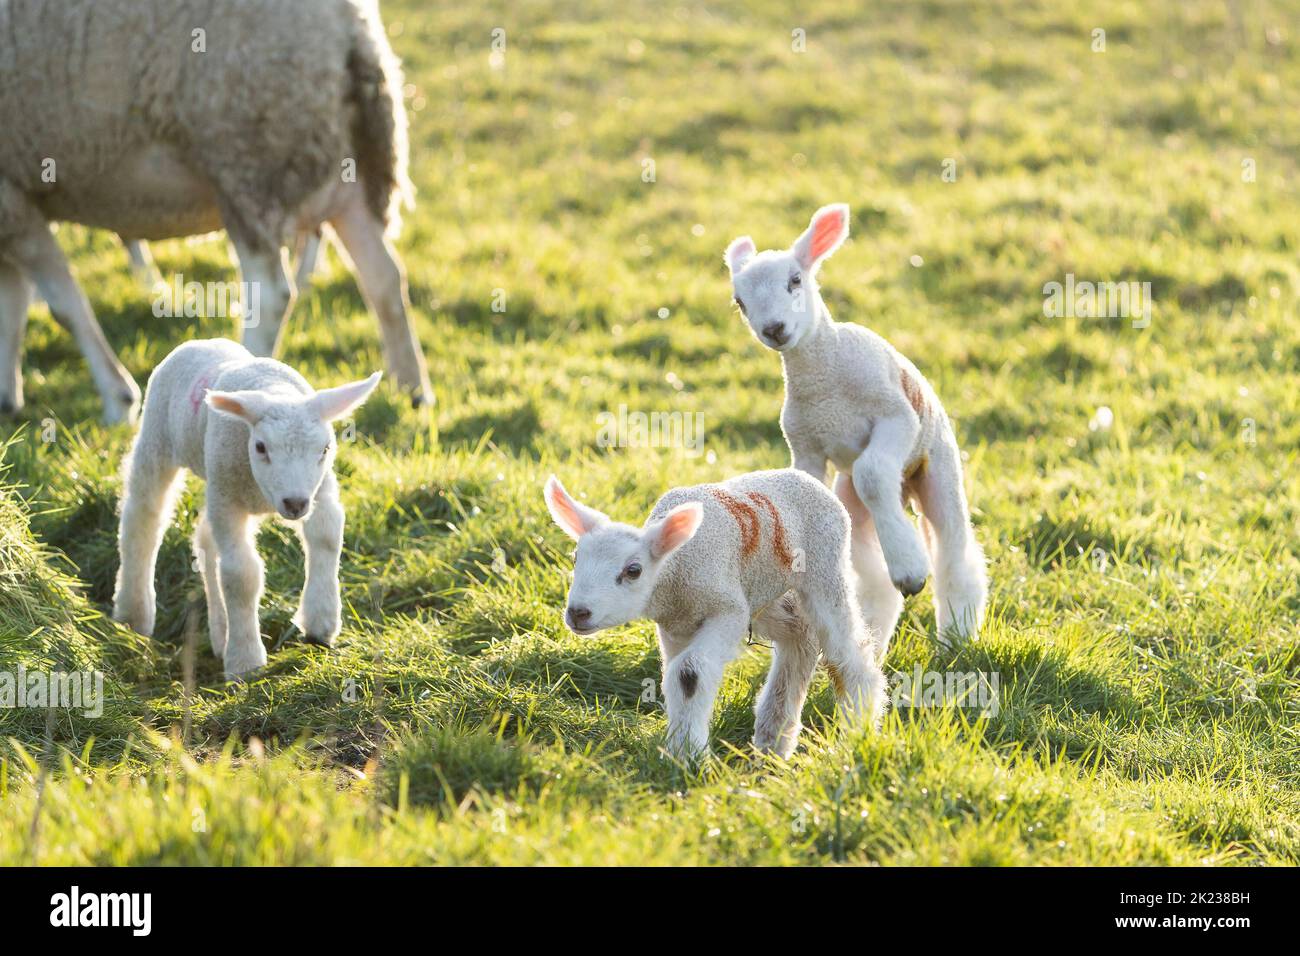 Playful British lambs outdoors in field. Stock Photo